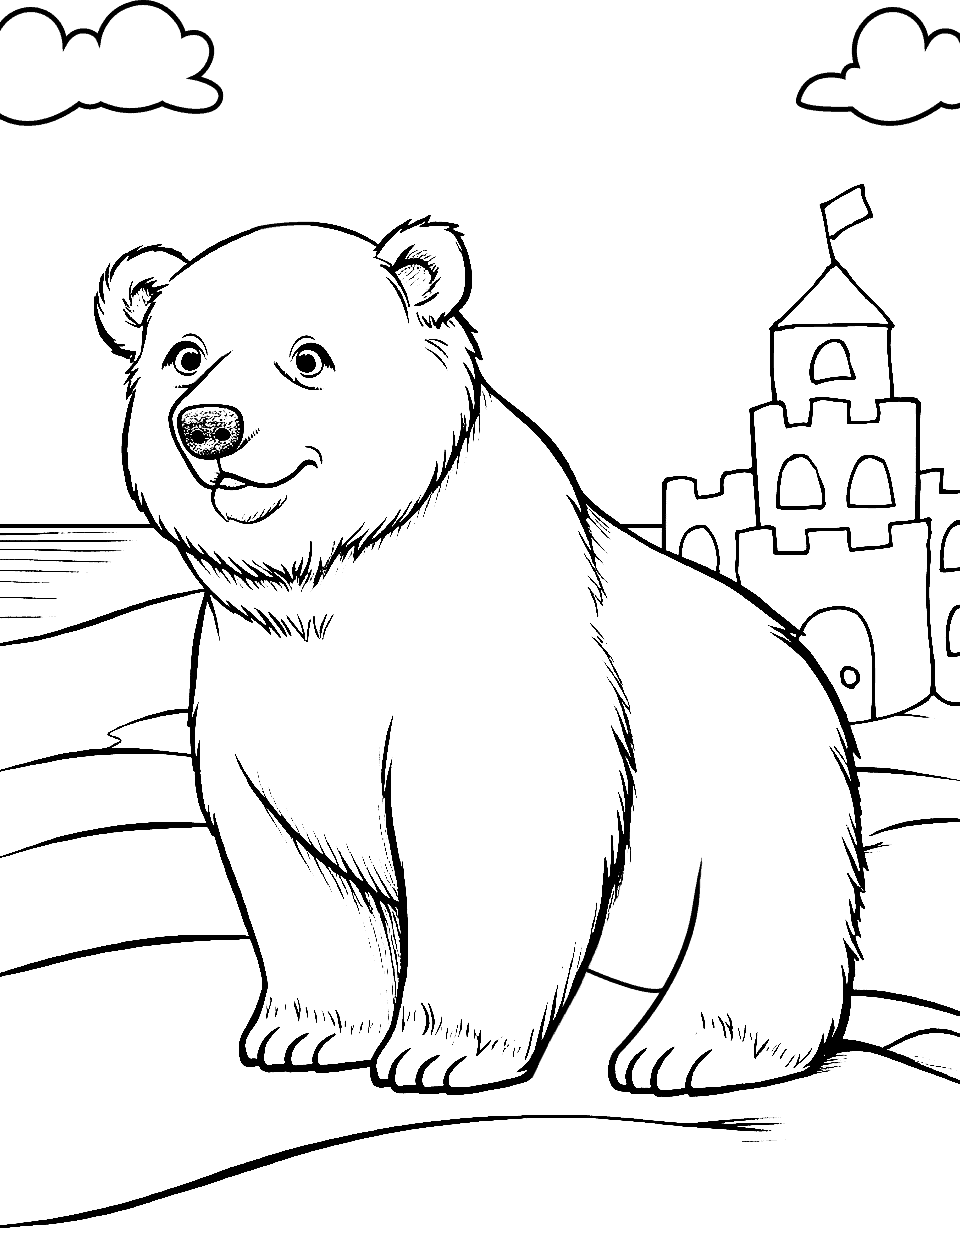 Beach Day for Bear Coloring Page - A bear enjoying a day on the beach by the sea with a sandcastle in the background.